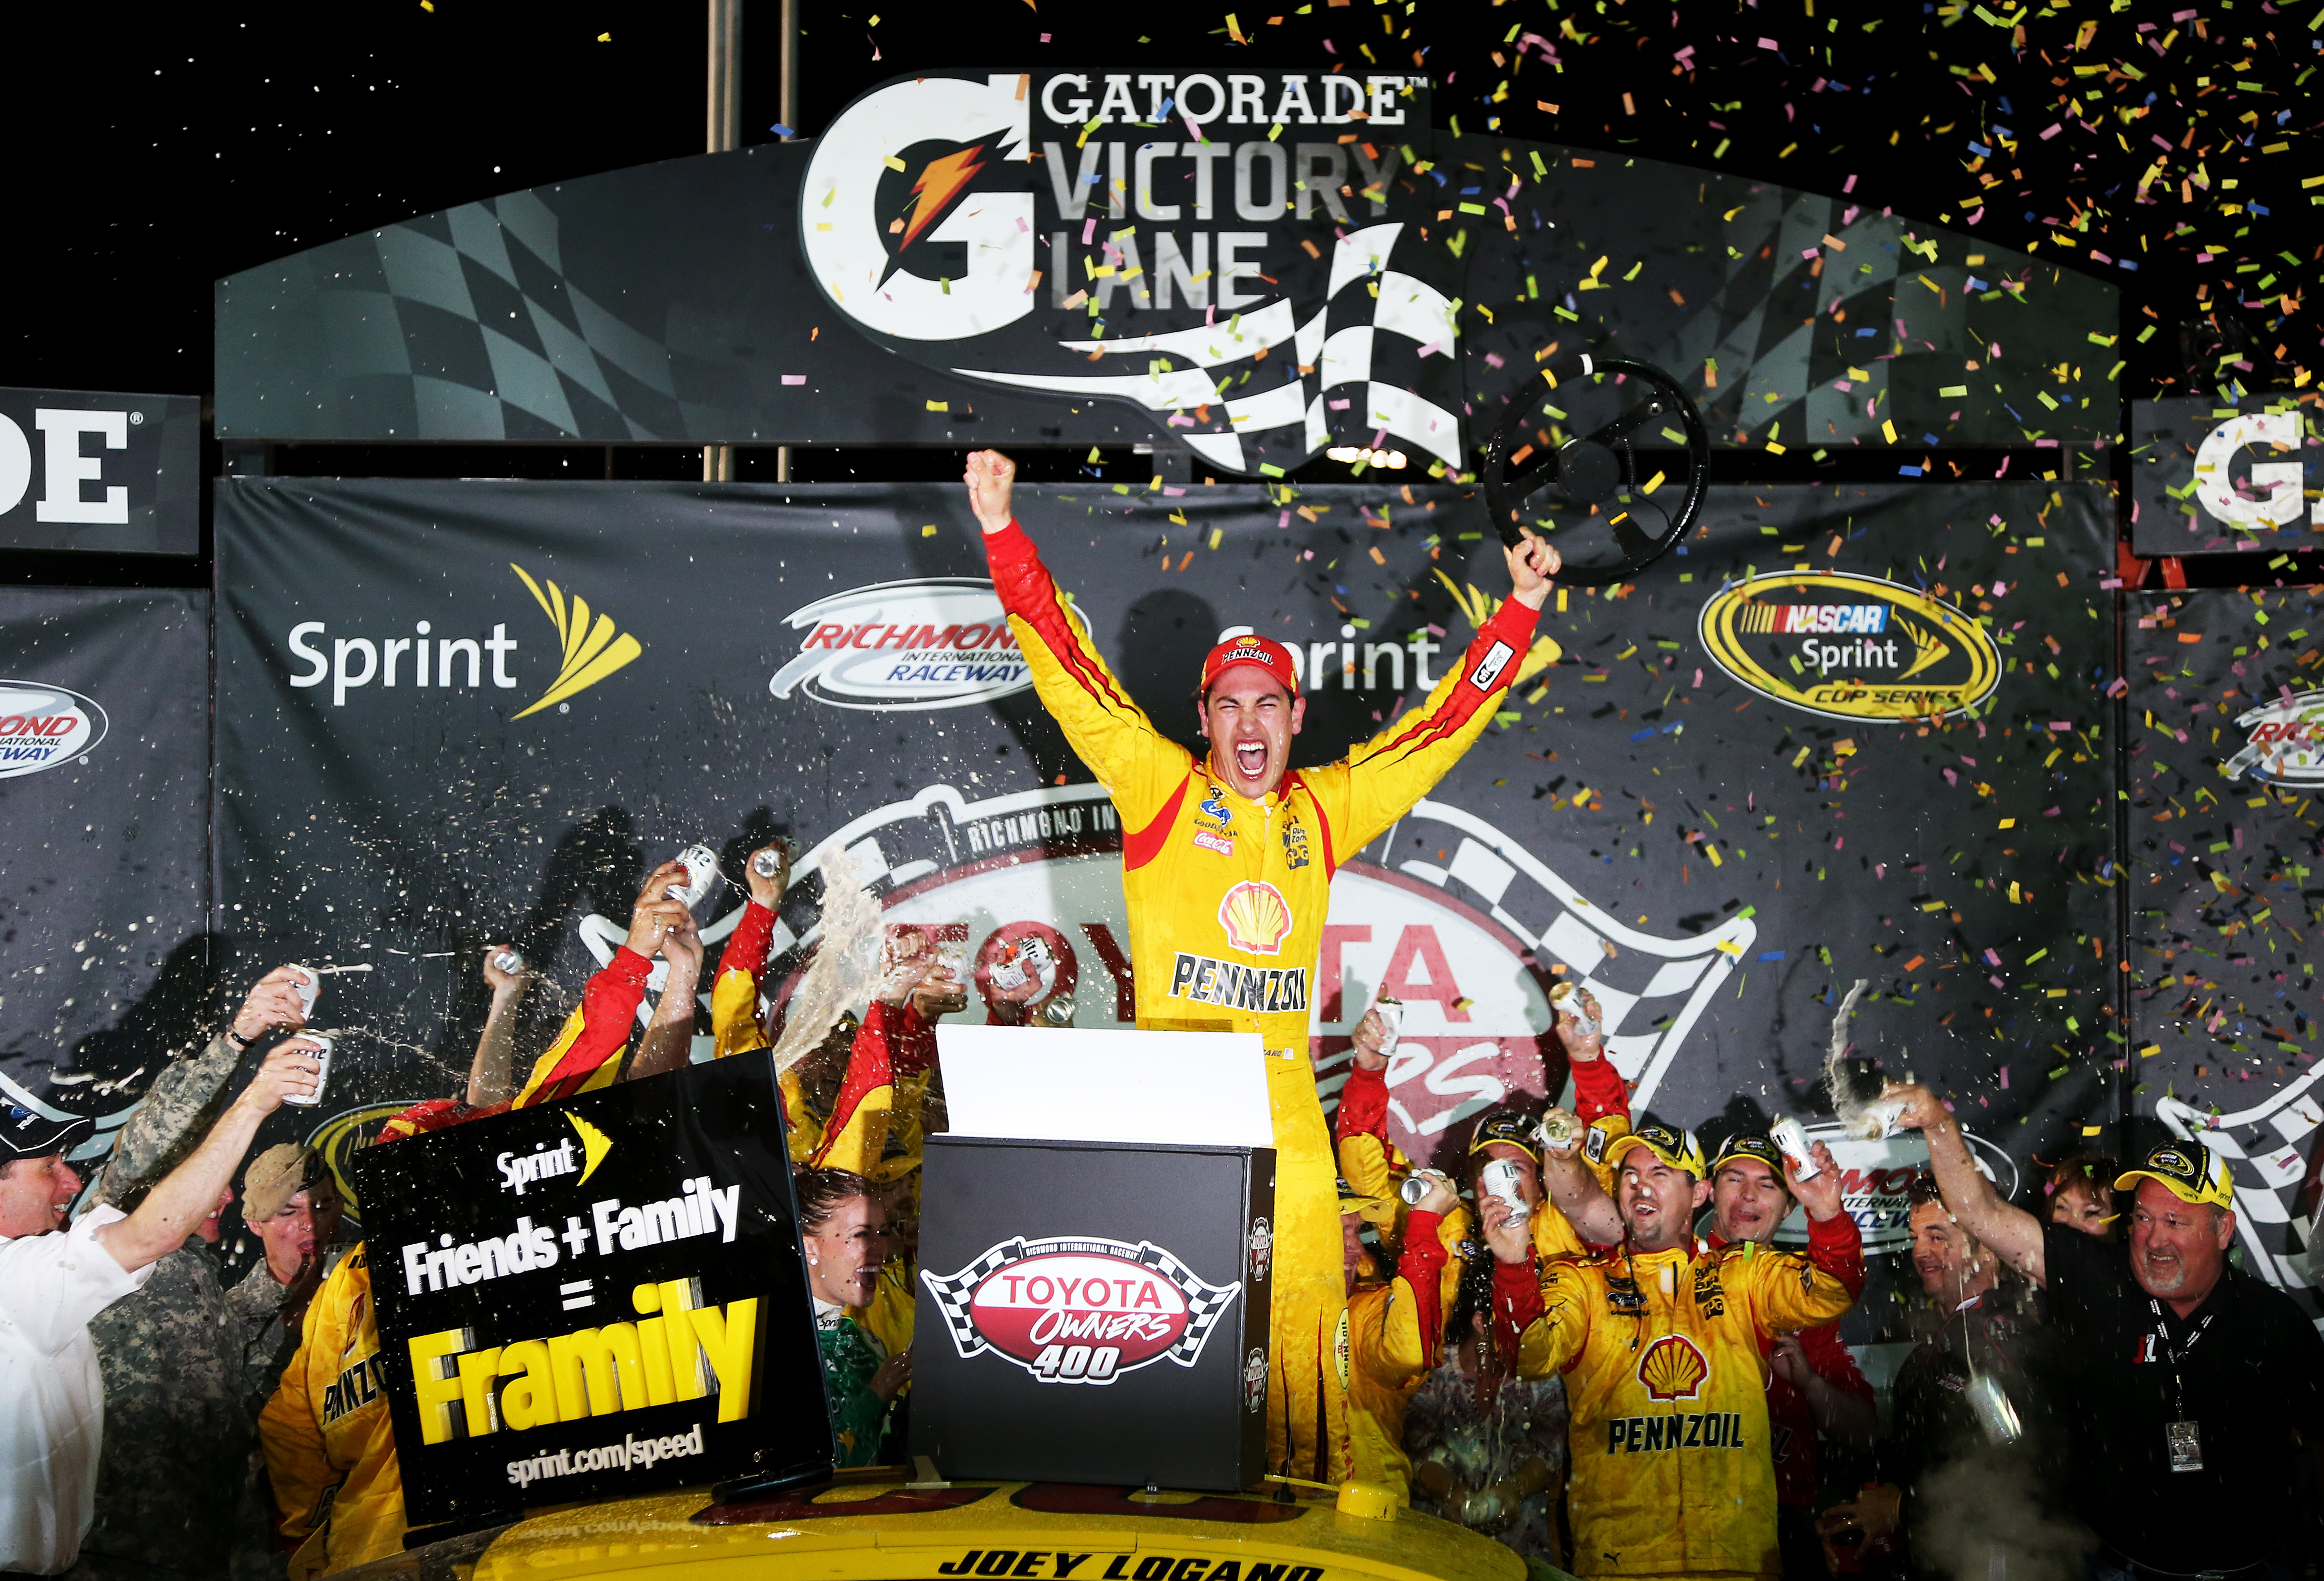 A wild battle in the final few laps gave way to Joey Logano winning at Richmond, and a few confrontations afterward.